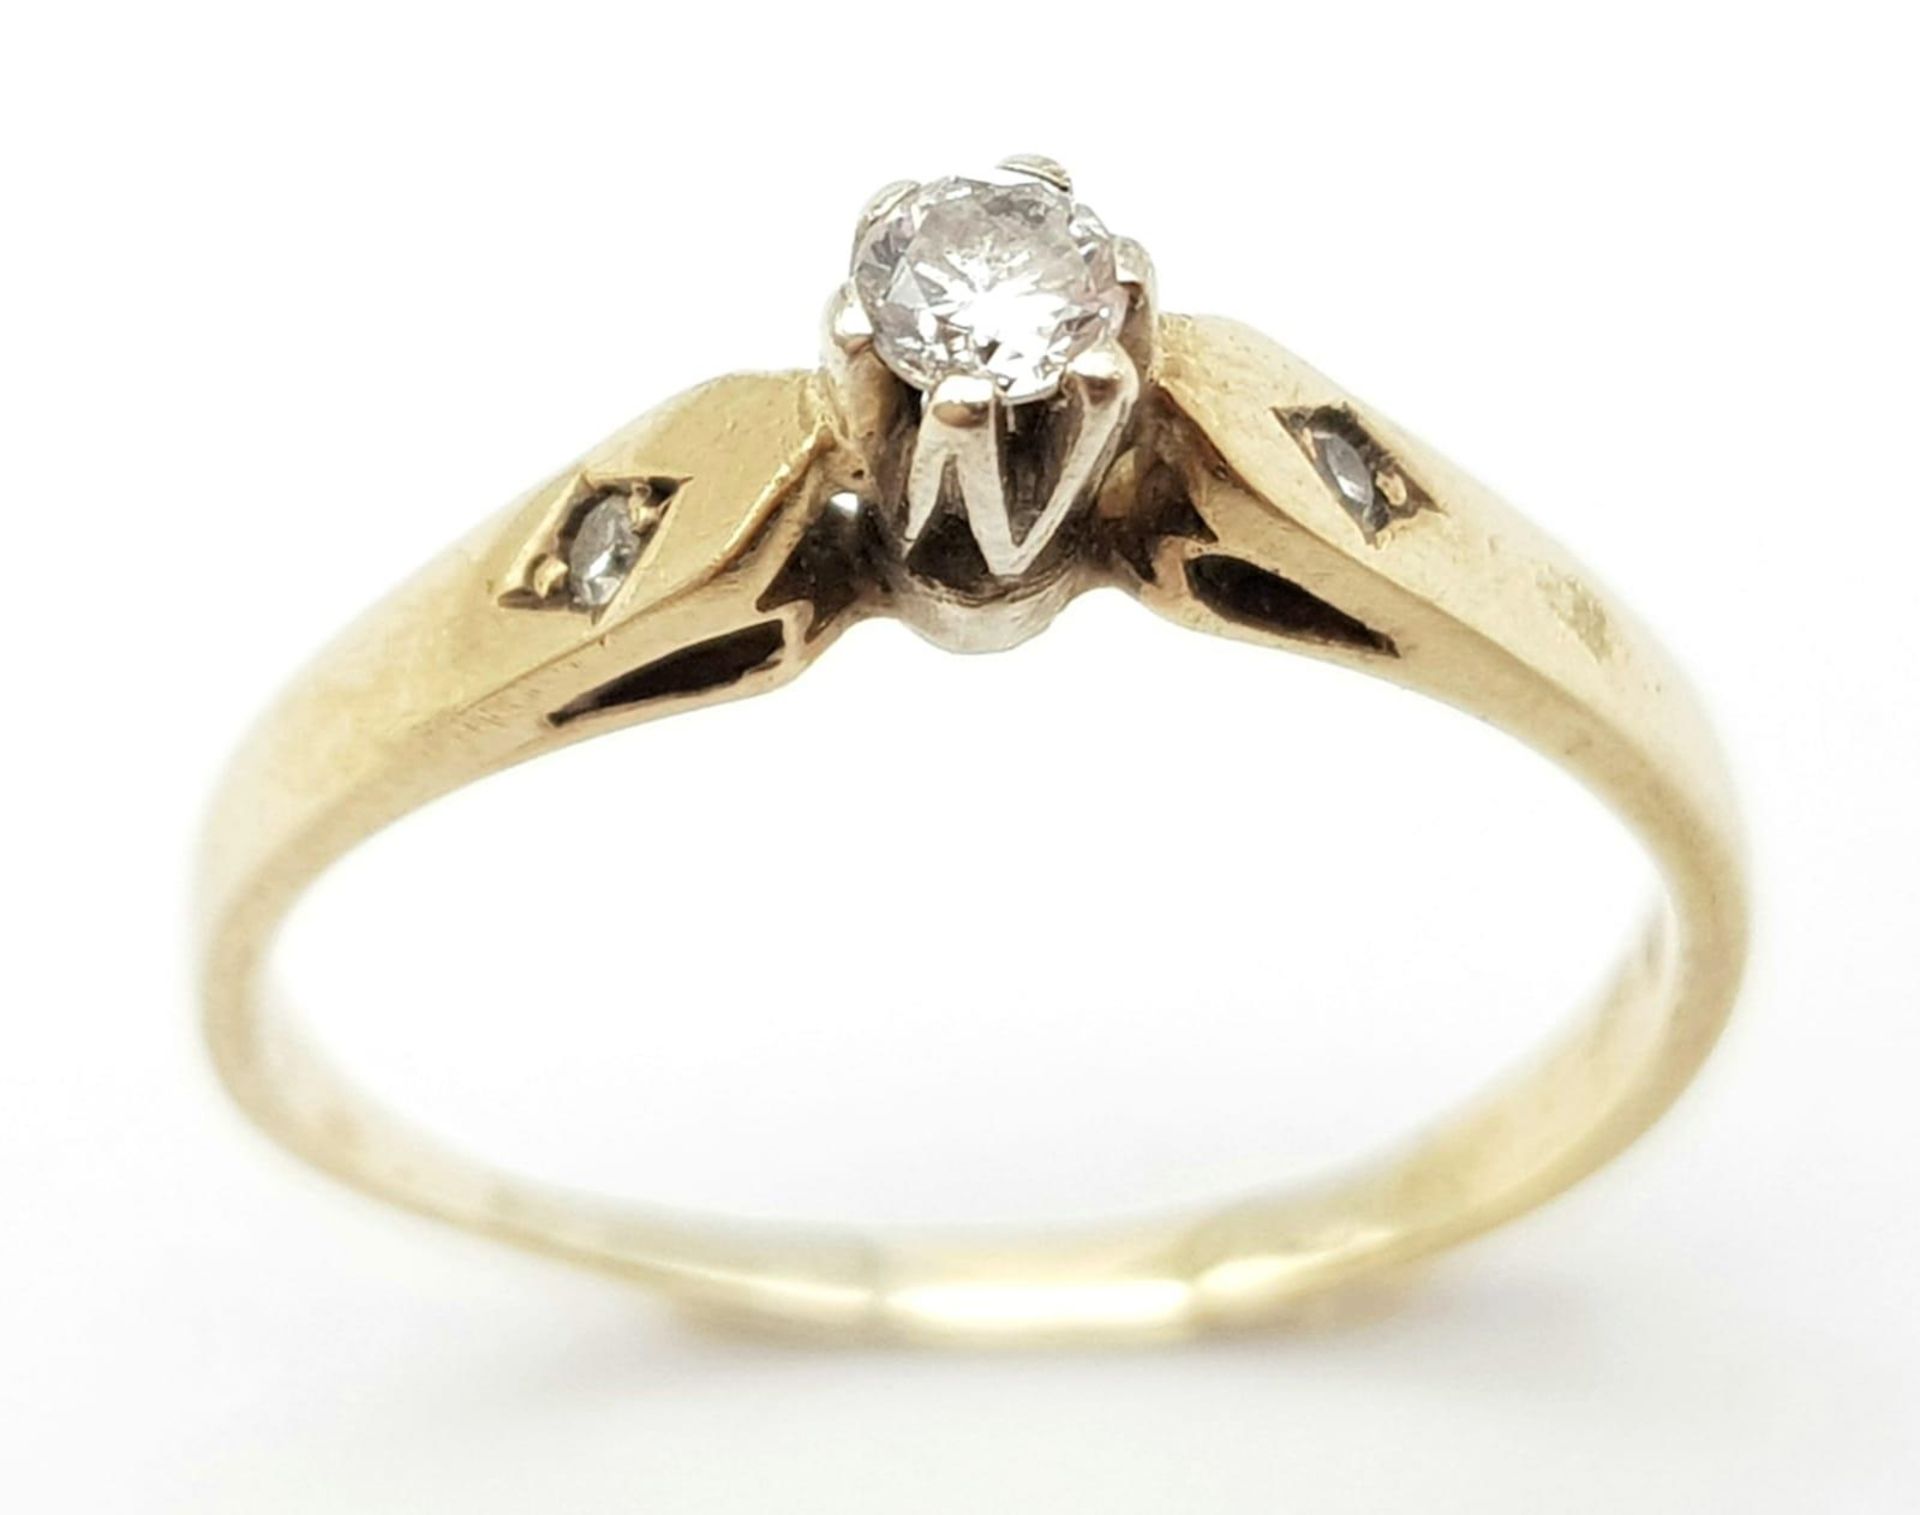 A 9K Yellow Gold Diamond Ring. 0.2ct central diamond with diamond accents. Size M 1/2. 1.52g total - Bild 2 aus 5